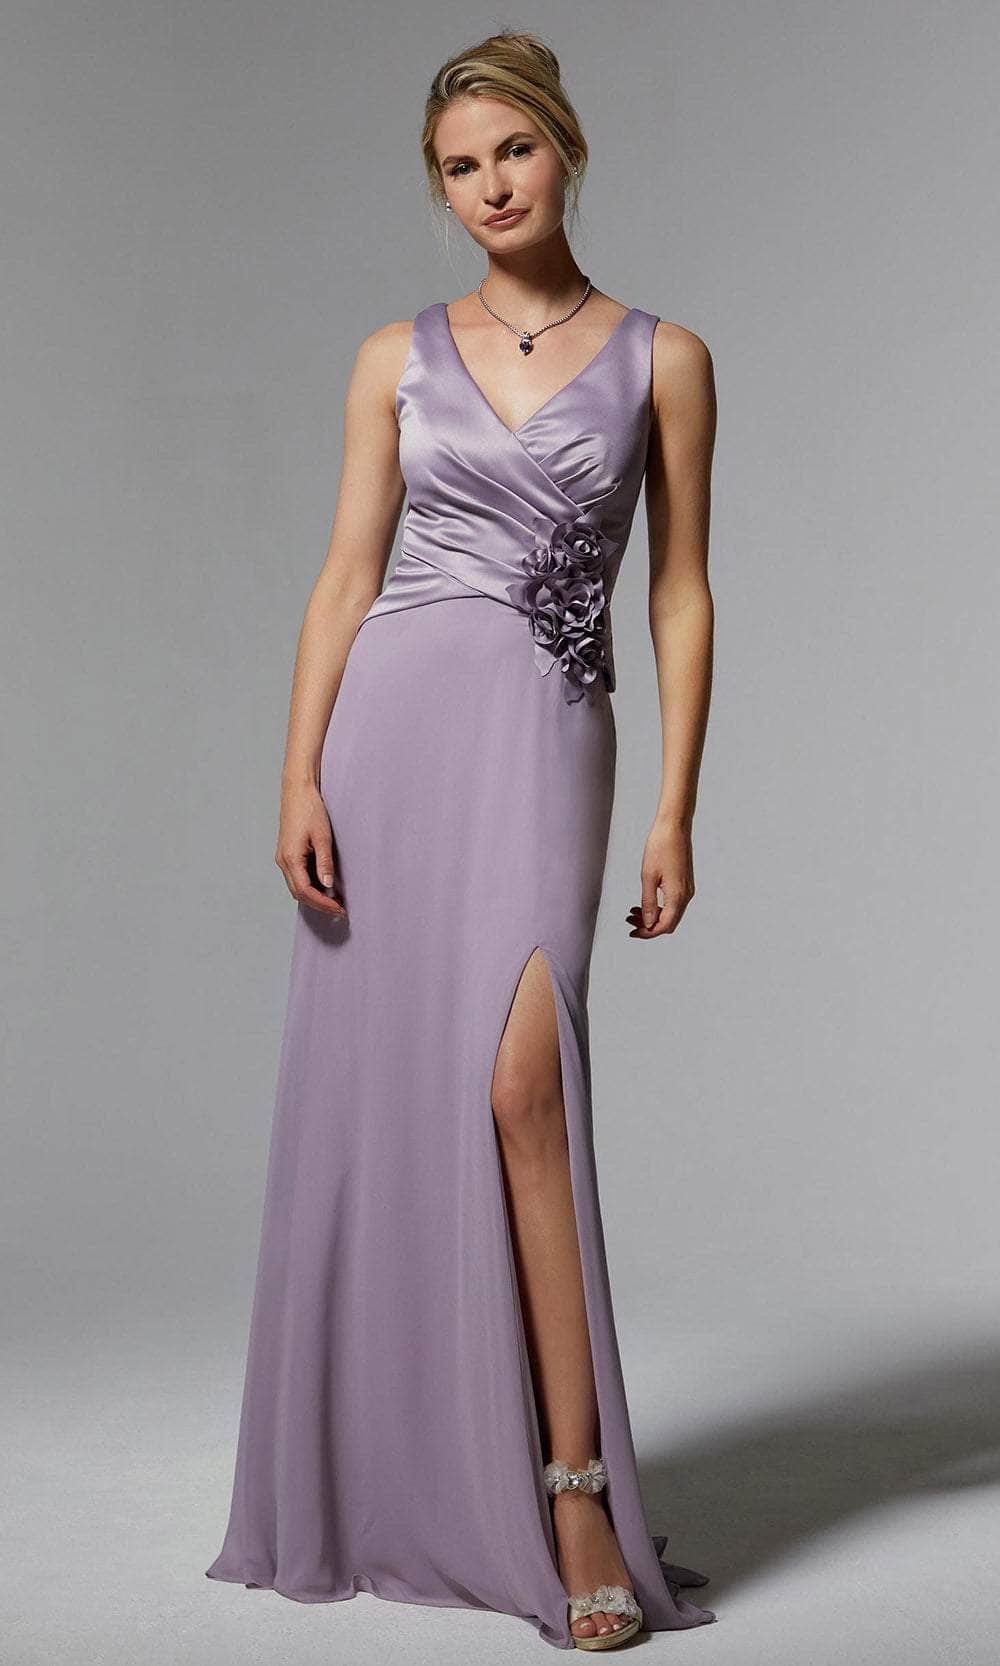 MGNY by Mori Lee 72903 - Applique Satin Evening Dress Prom Dress 00 /  French Lilac